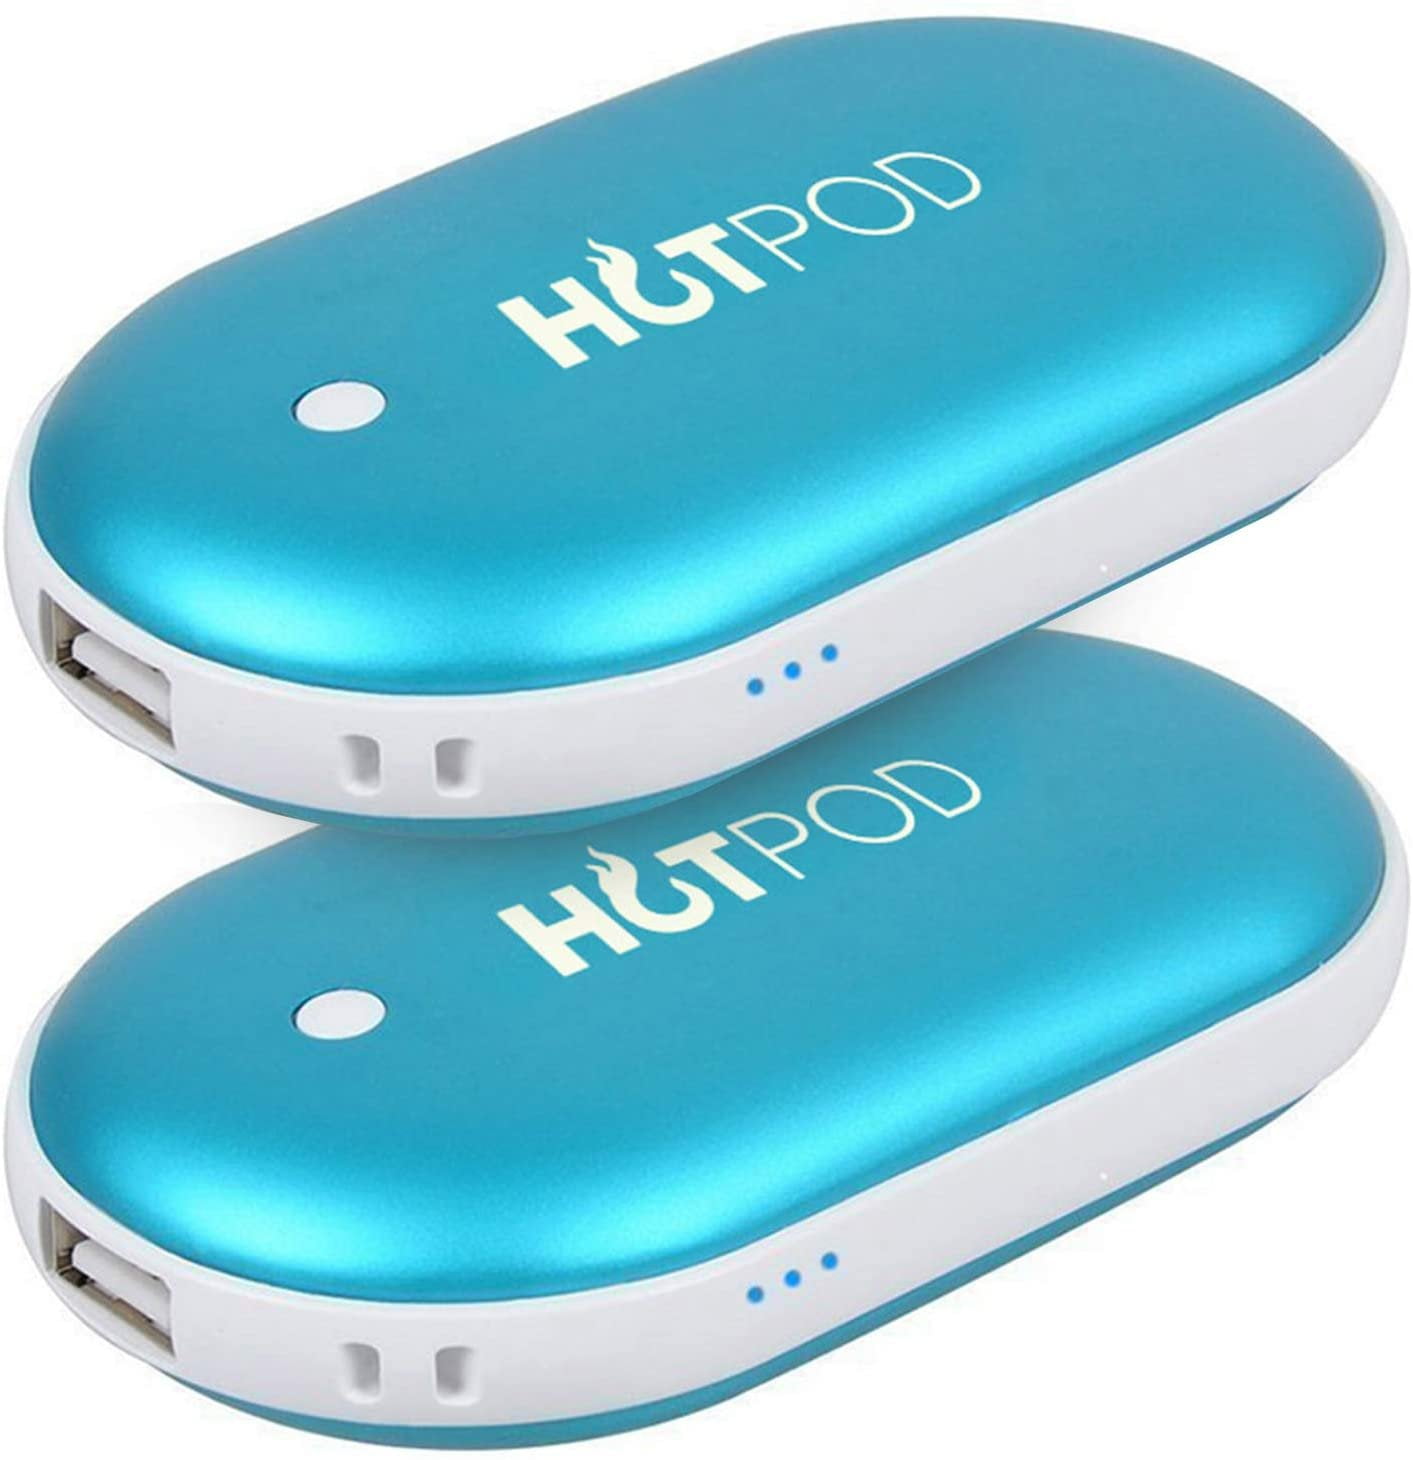 5200mAh Power Bank Hand Warmer Instant Heating Pocket Heater USB Charger Blue 